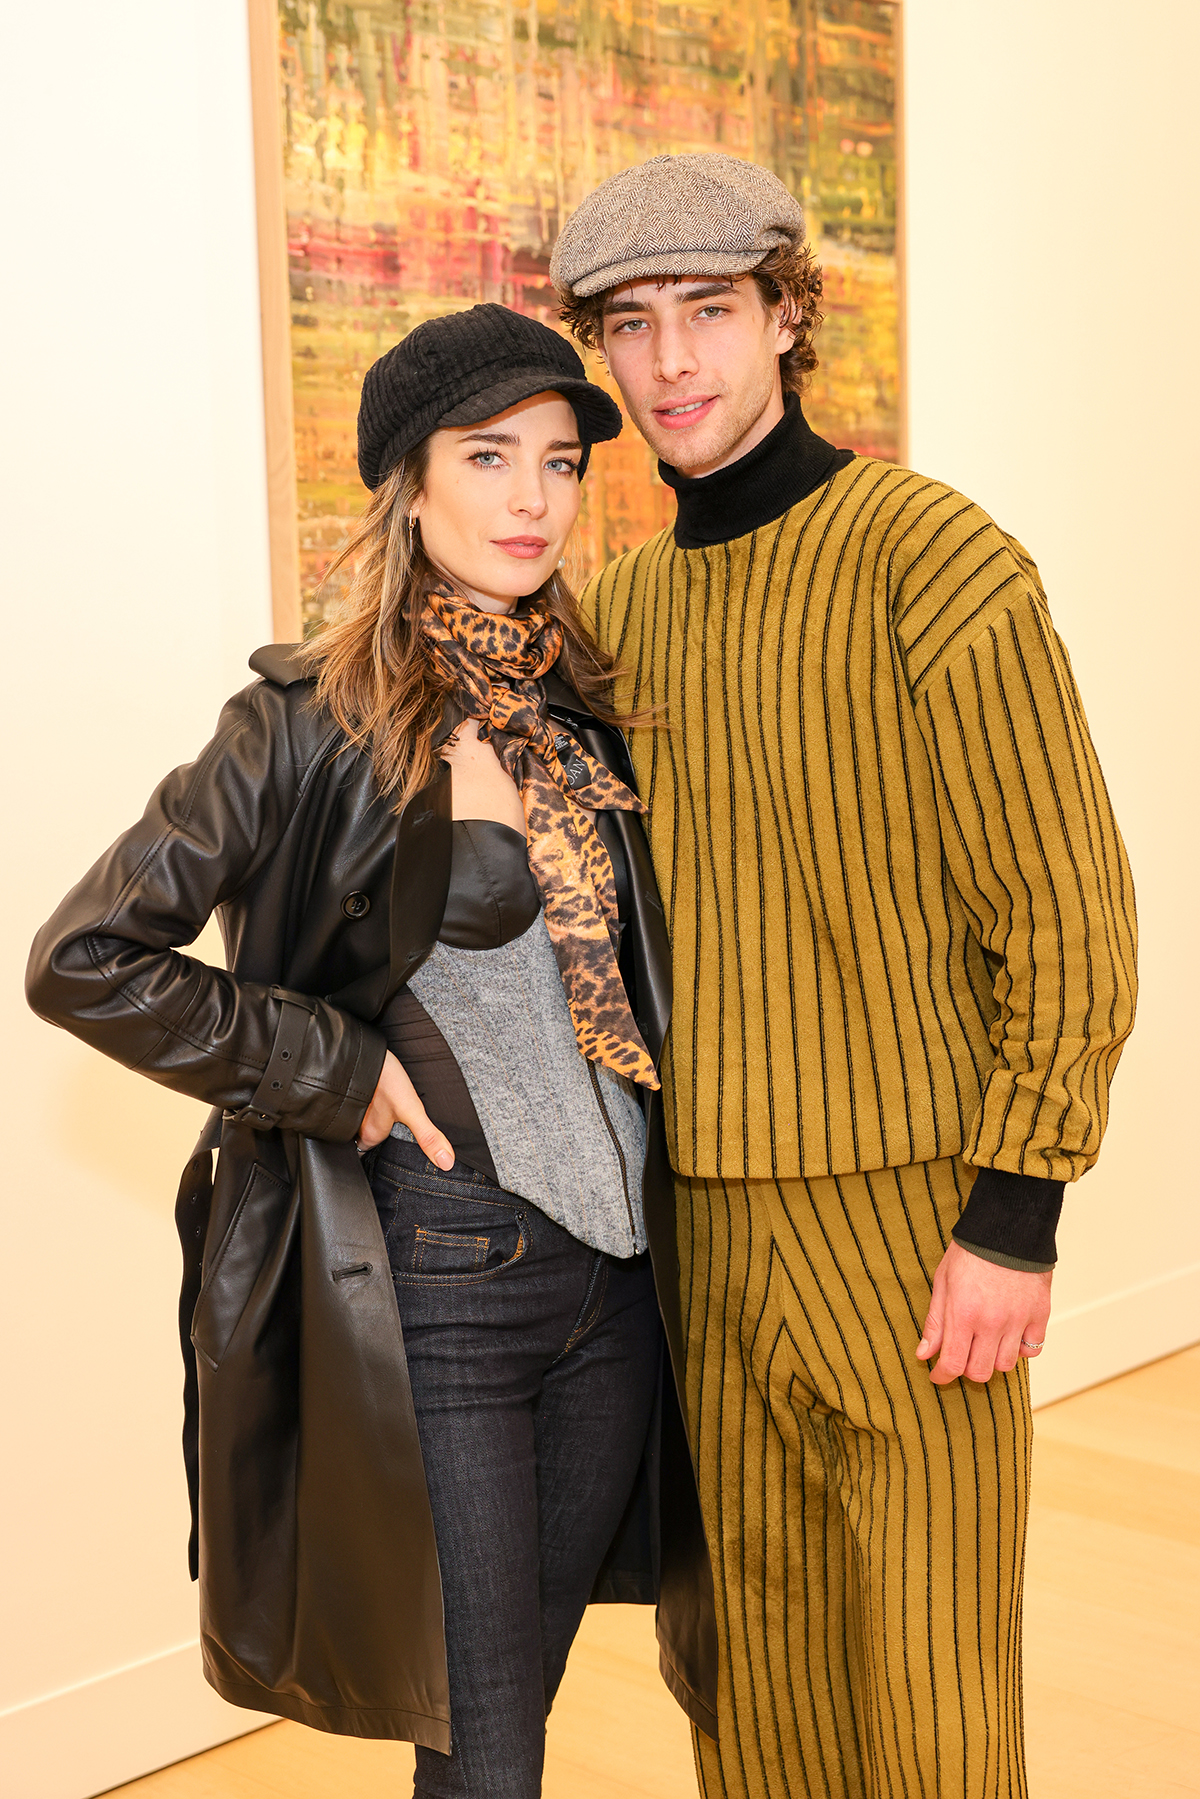 A man wearing a yellow and black striped coord standing next to a woman wearing a black hat, jacket and jeans with a grey striped top